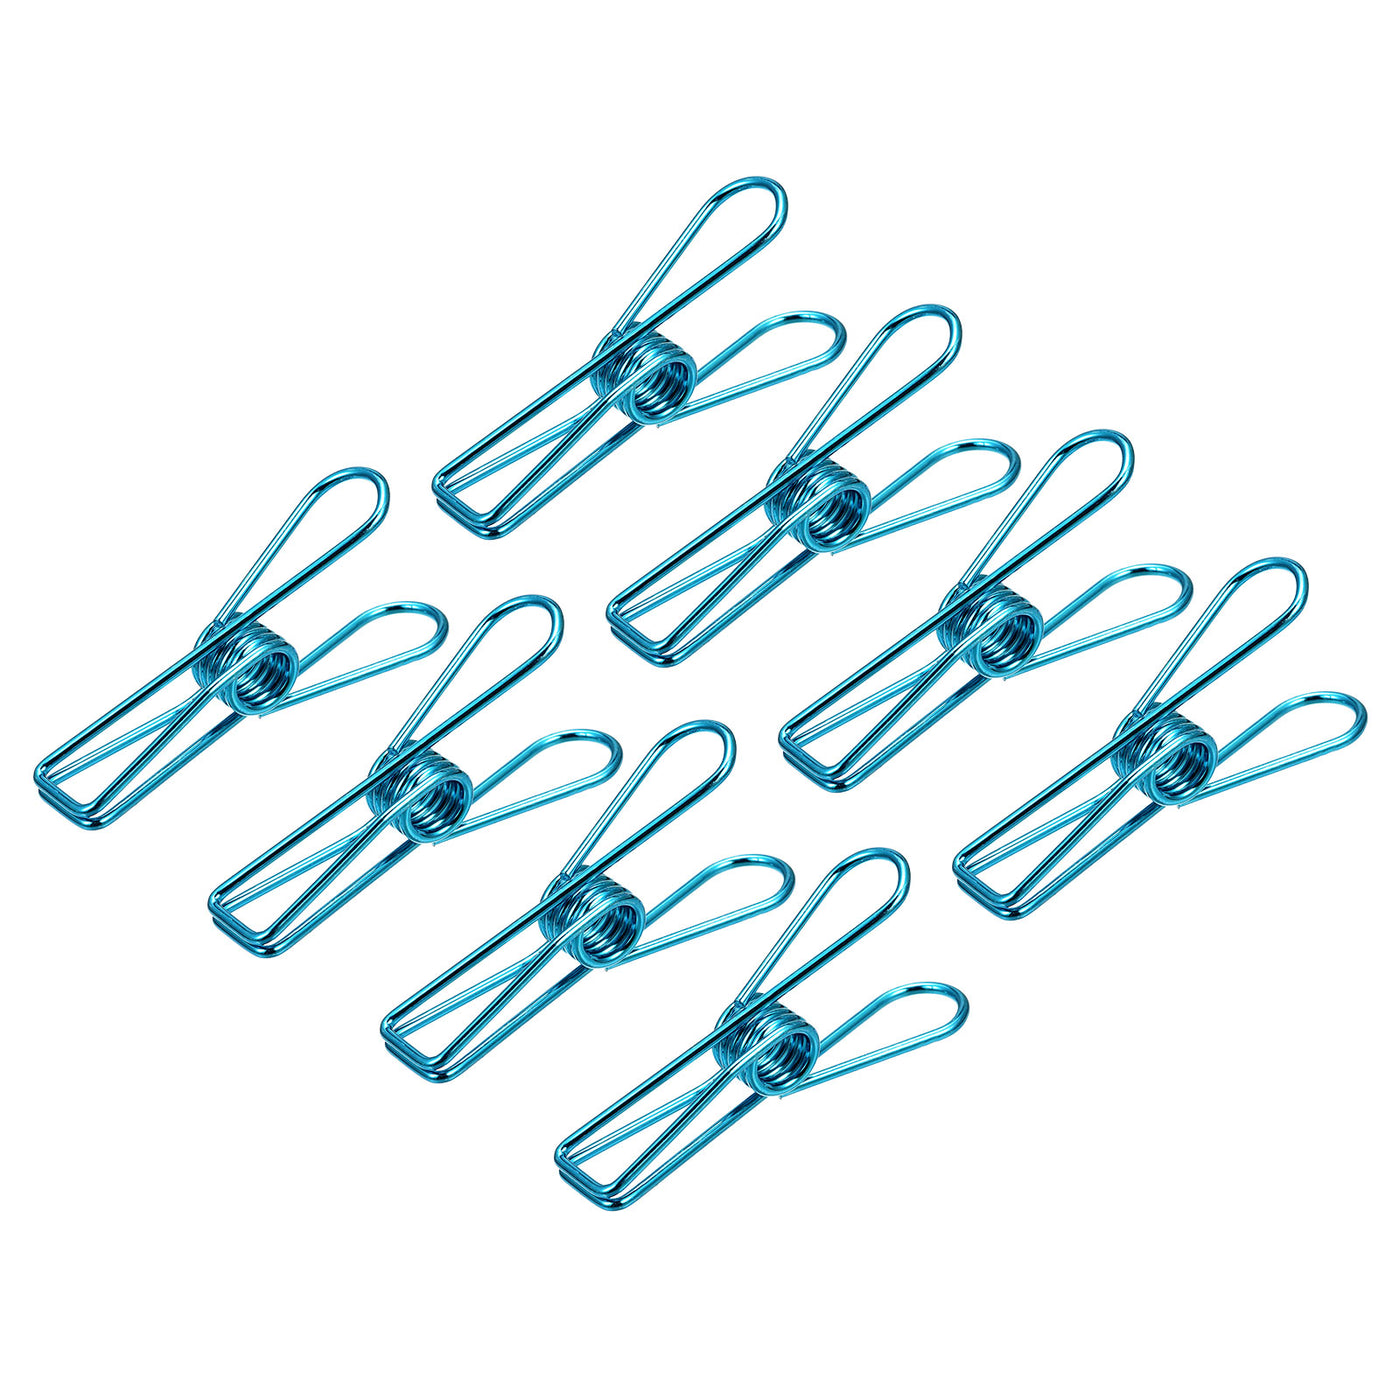 uxcell Uxcell Tablecloth Clips, 55mm Carbon Steel Clamps for Fix Table Cloth, Blue 8 Pcs